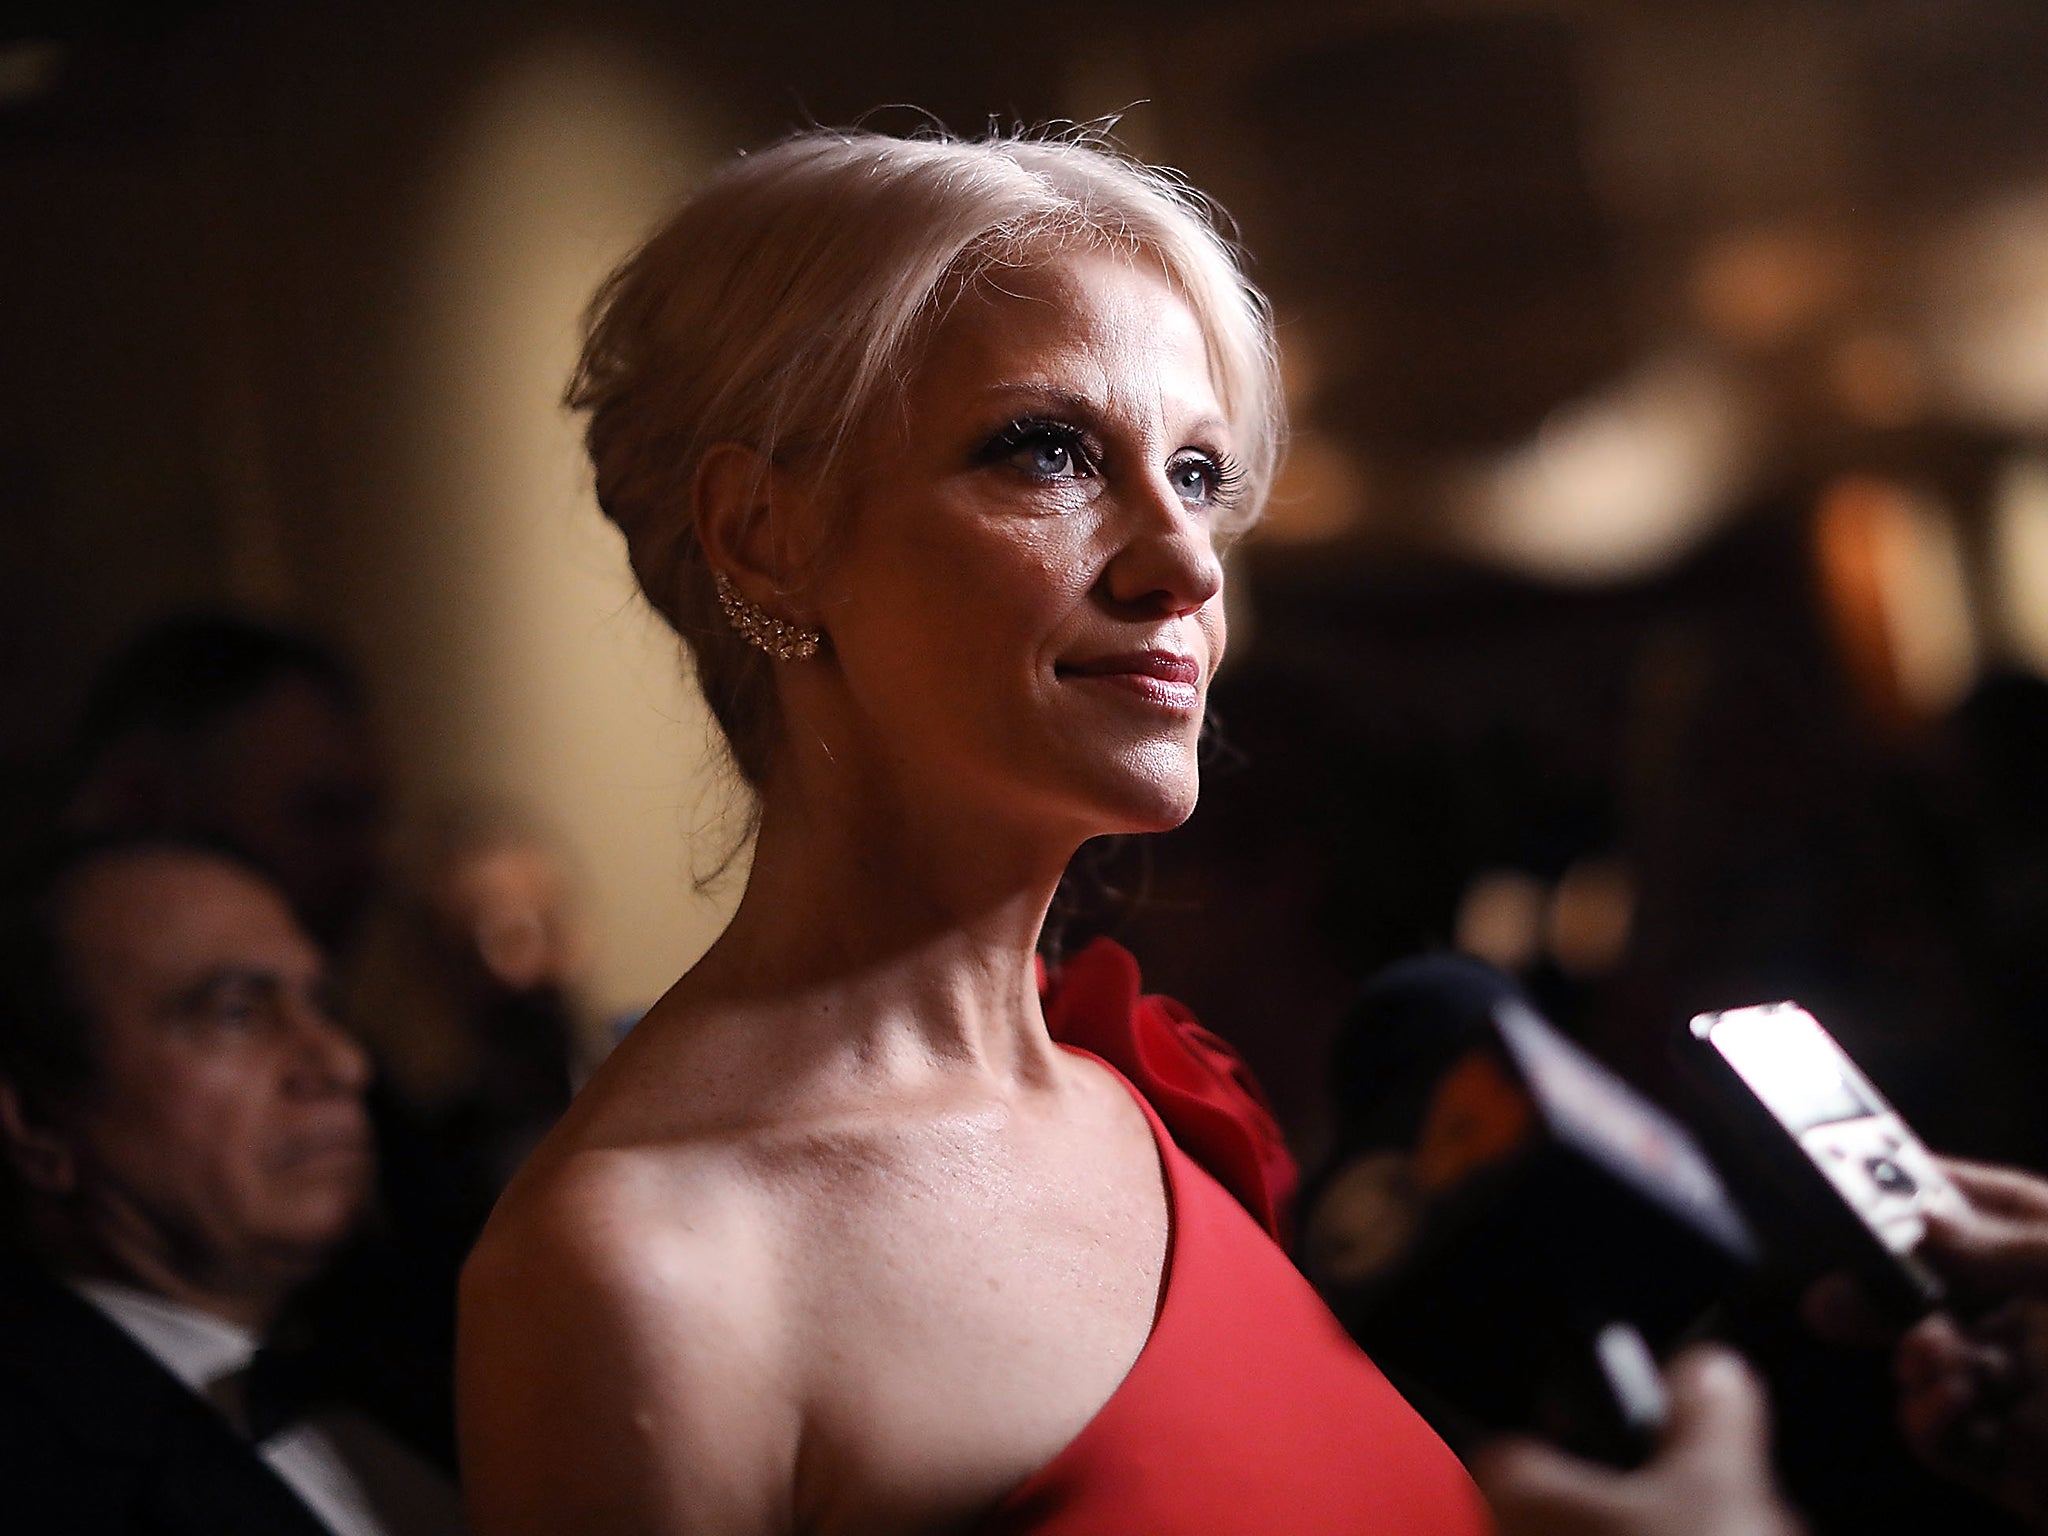 Kellyanne Conway, senior adviser to President-elect Donald Trump, attends the Indiana Society Ball in honor of Vice President-elect Mike Pence in Washington, DC